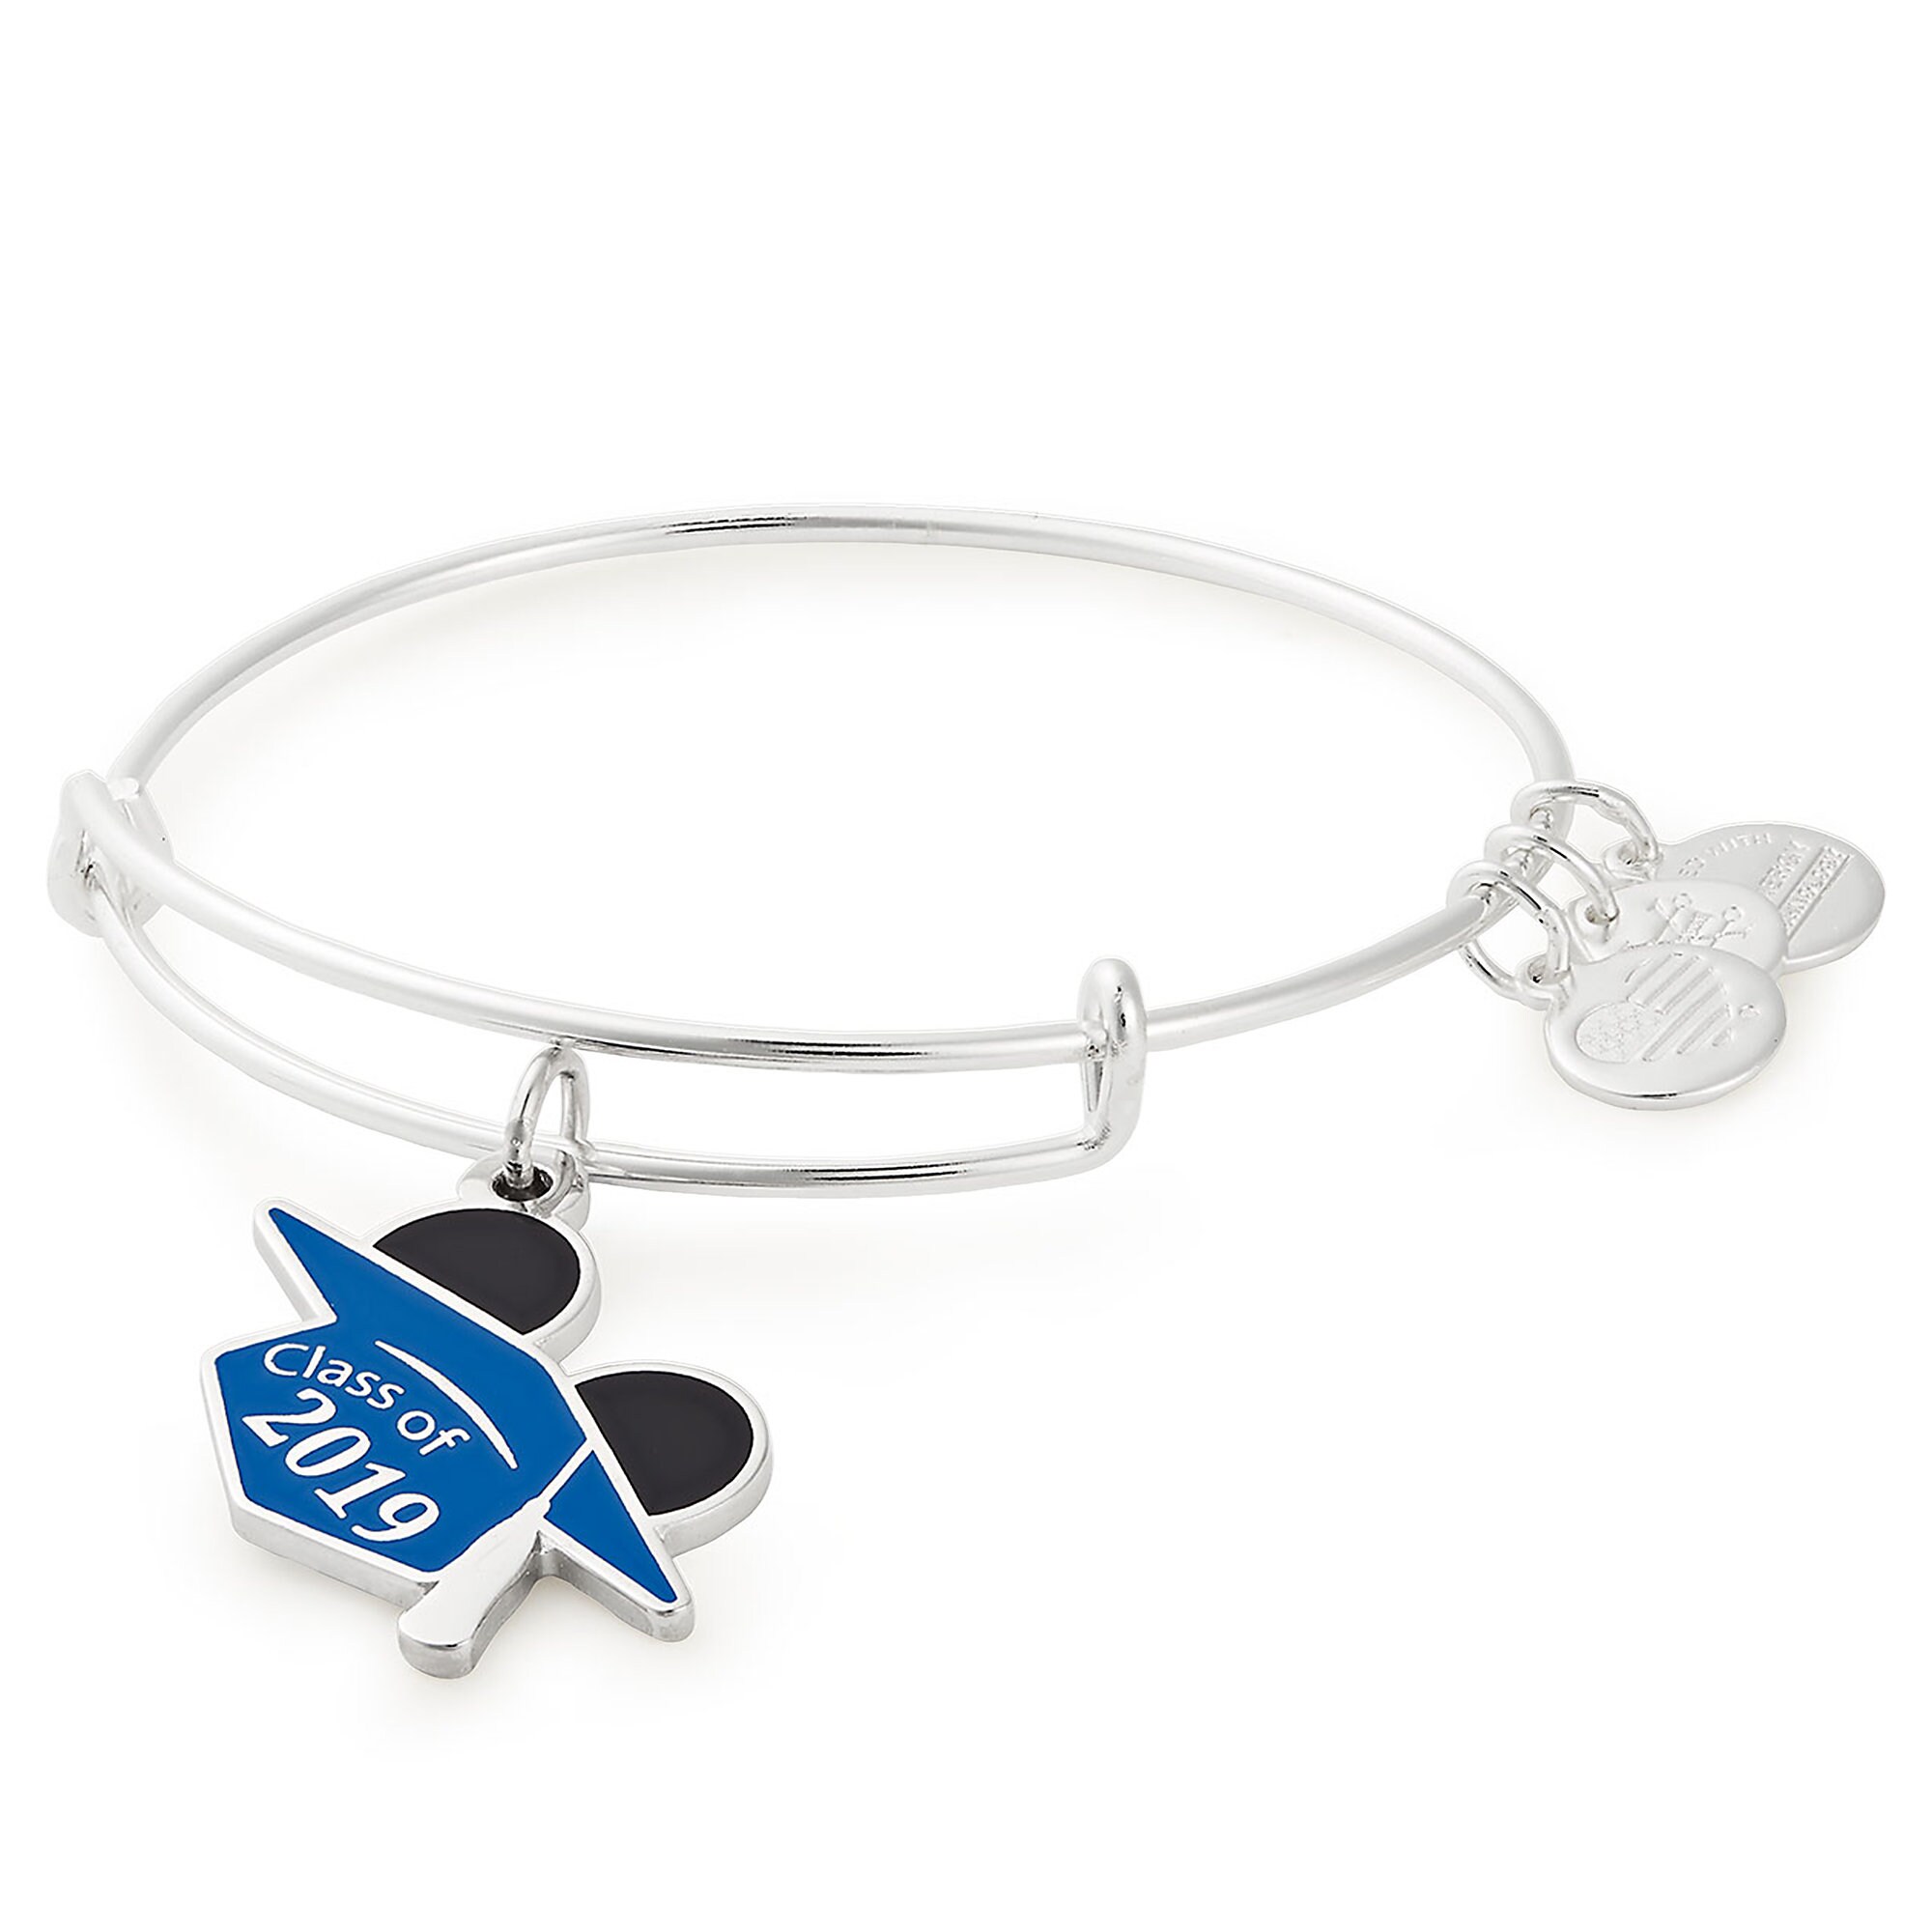 Mickey Mouse Graduation Cap Bangle by Alex and Ani - Class of 2019